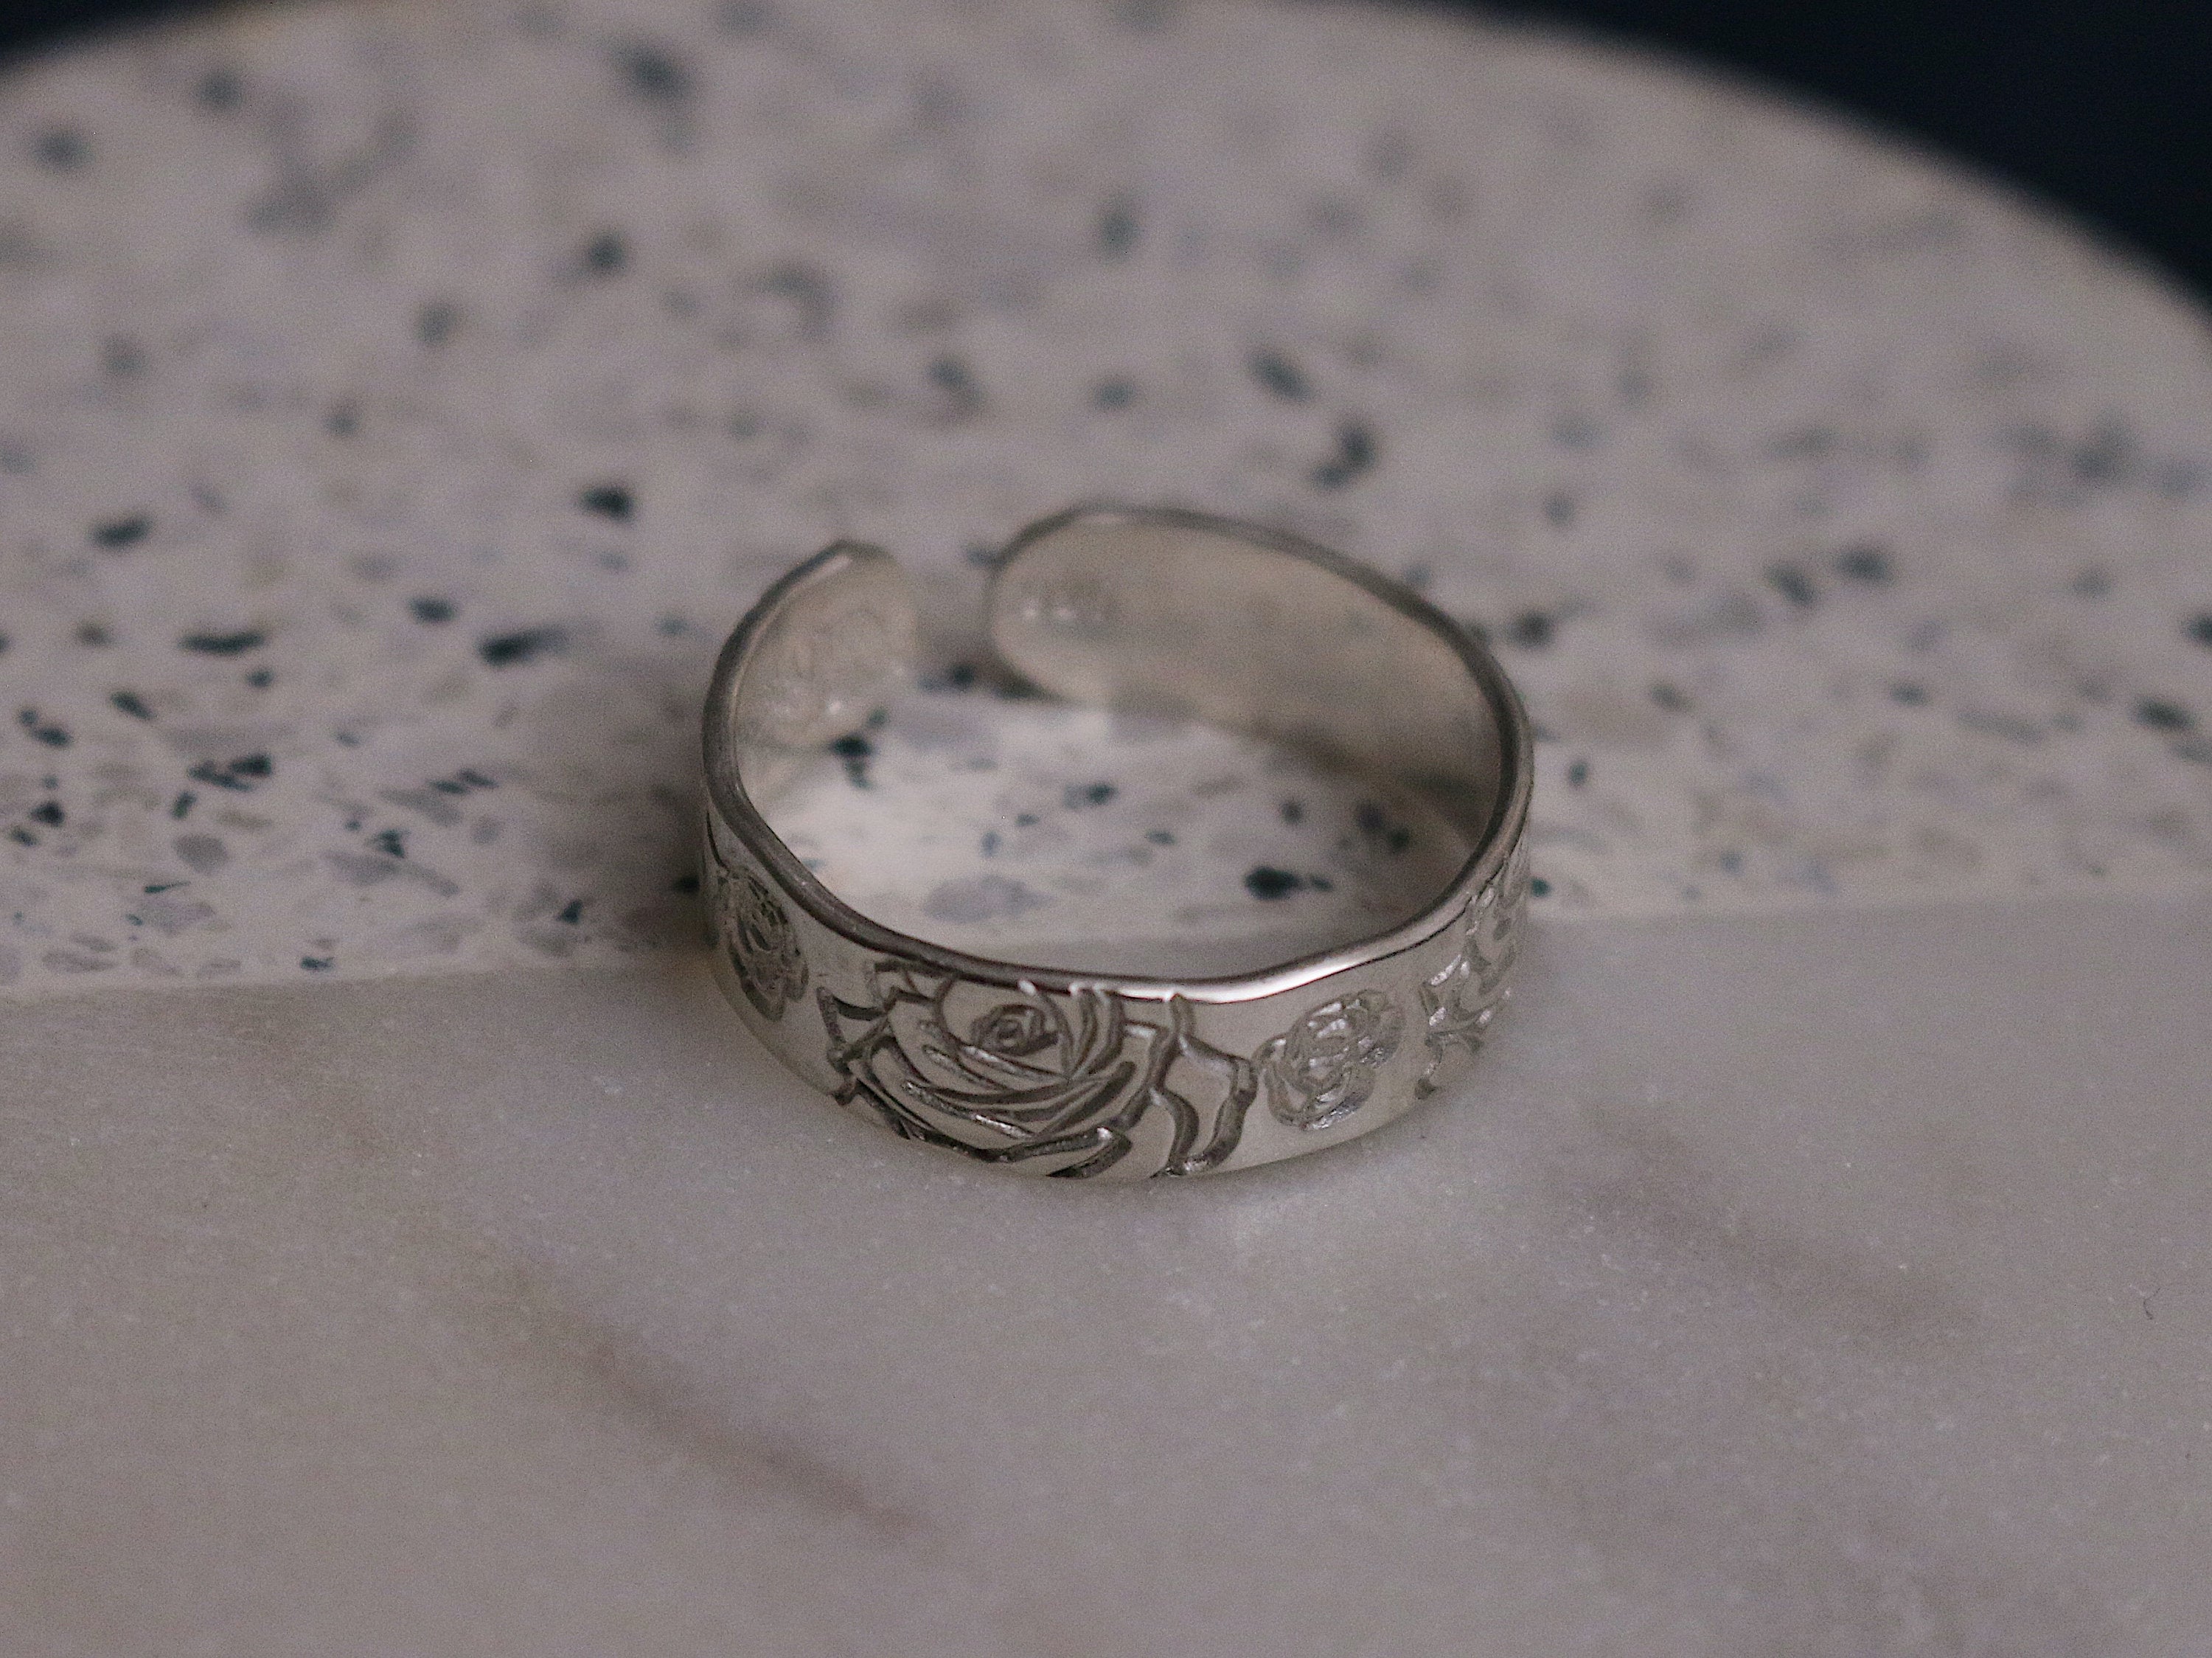 Rose Ring | June Birth Flower Ring | Wildflower | Best Friend Gift | 14k Gold Filled or Sterling | Floral Jewelry | June Birth Ring